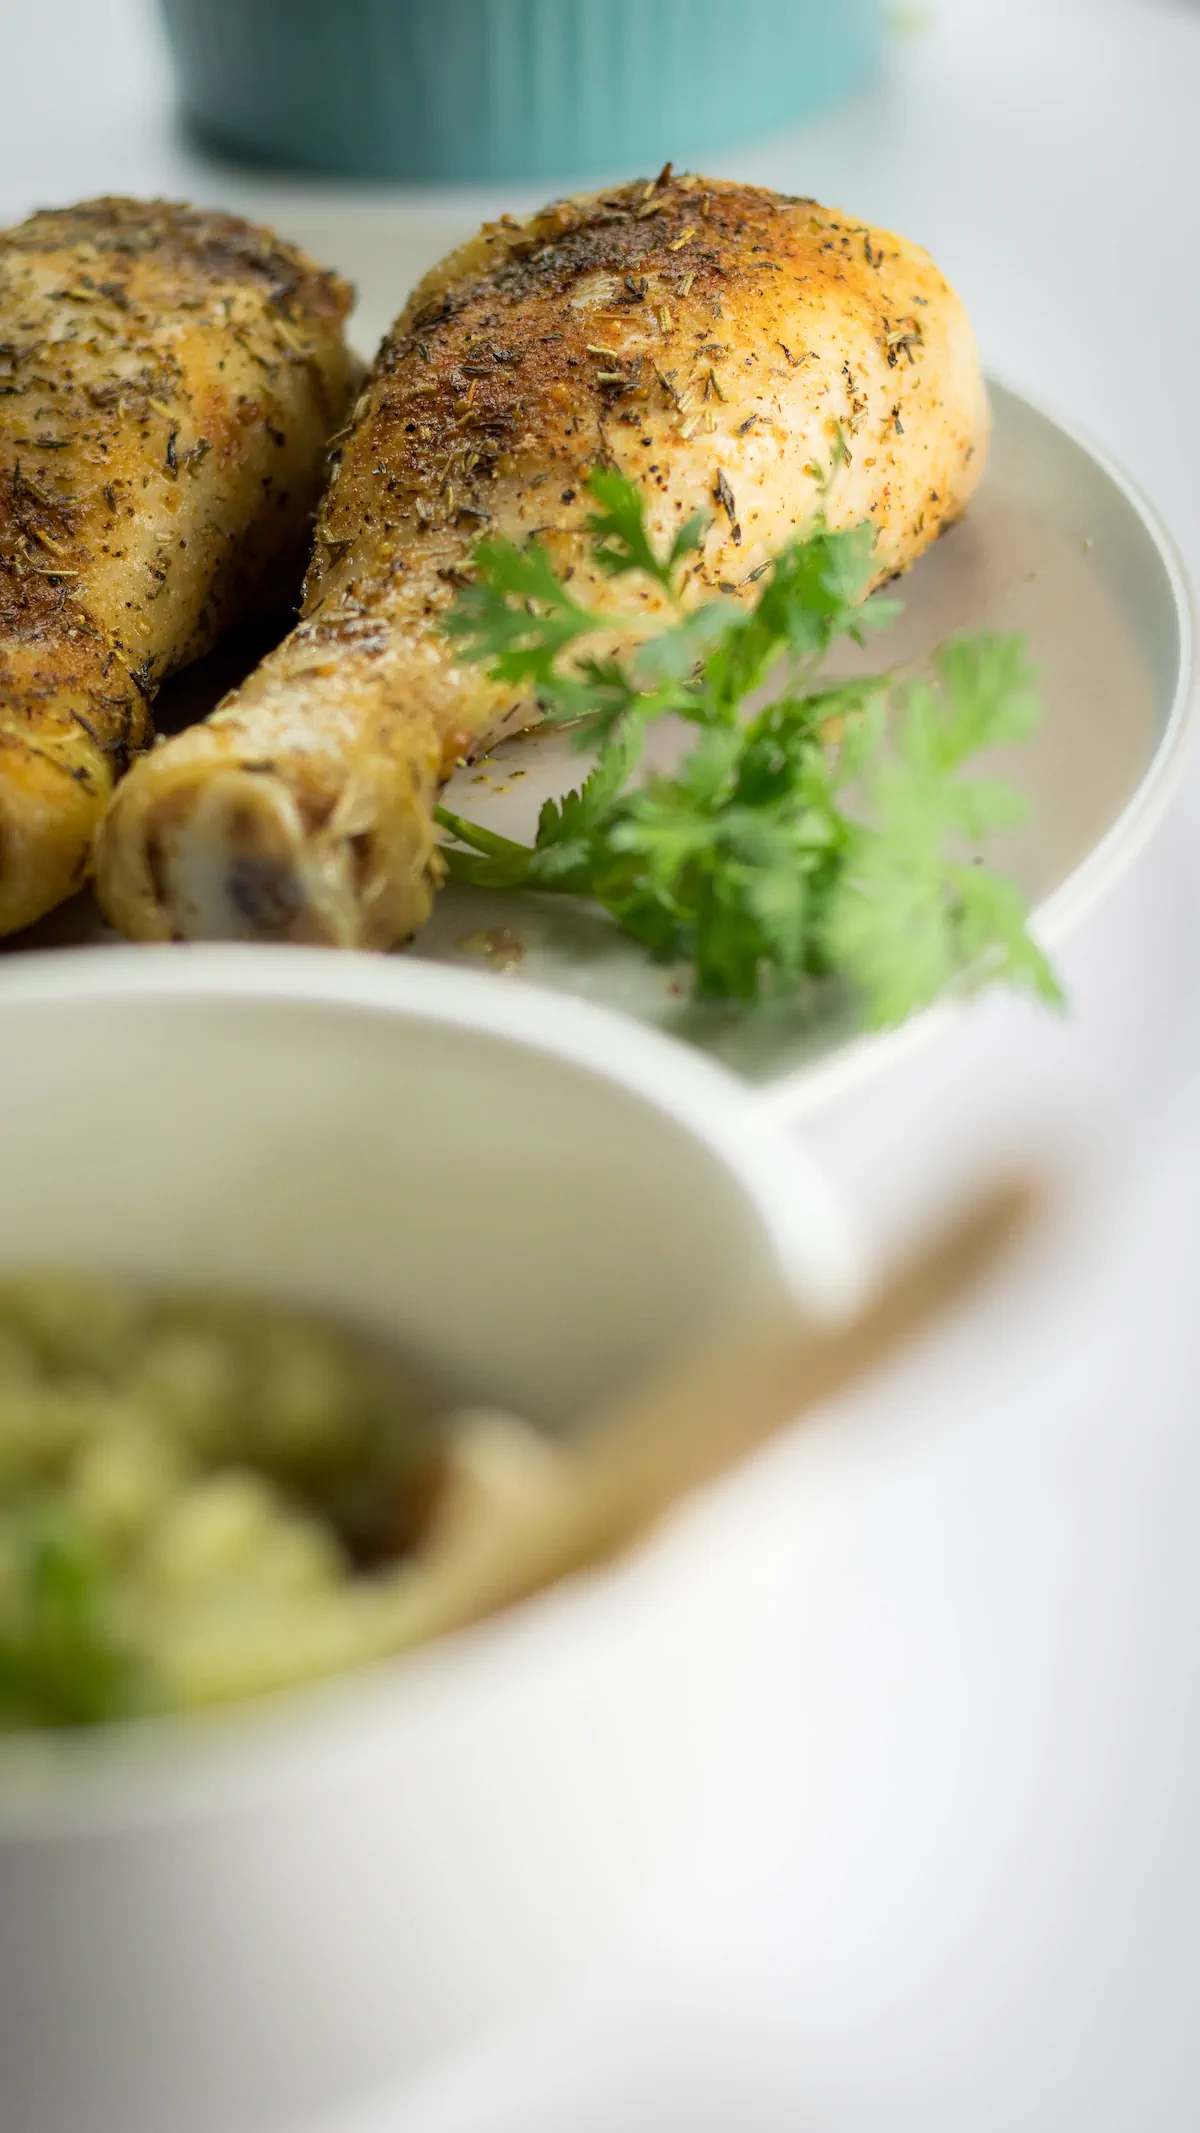 A focused shot of chicken legs baked in the oven and garnished with fresh herbs on a plate.